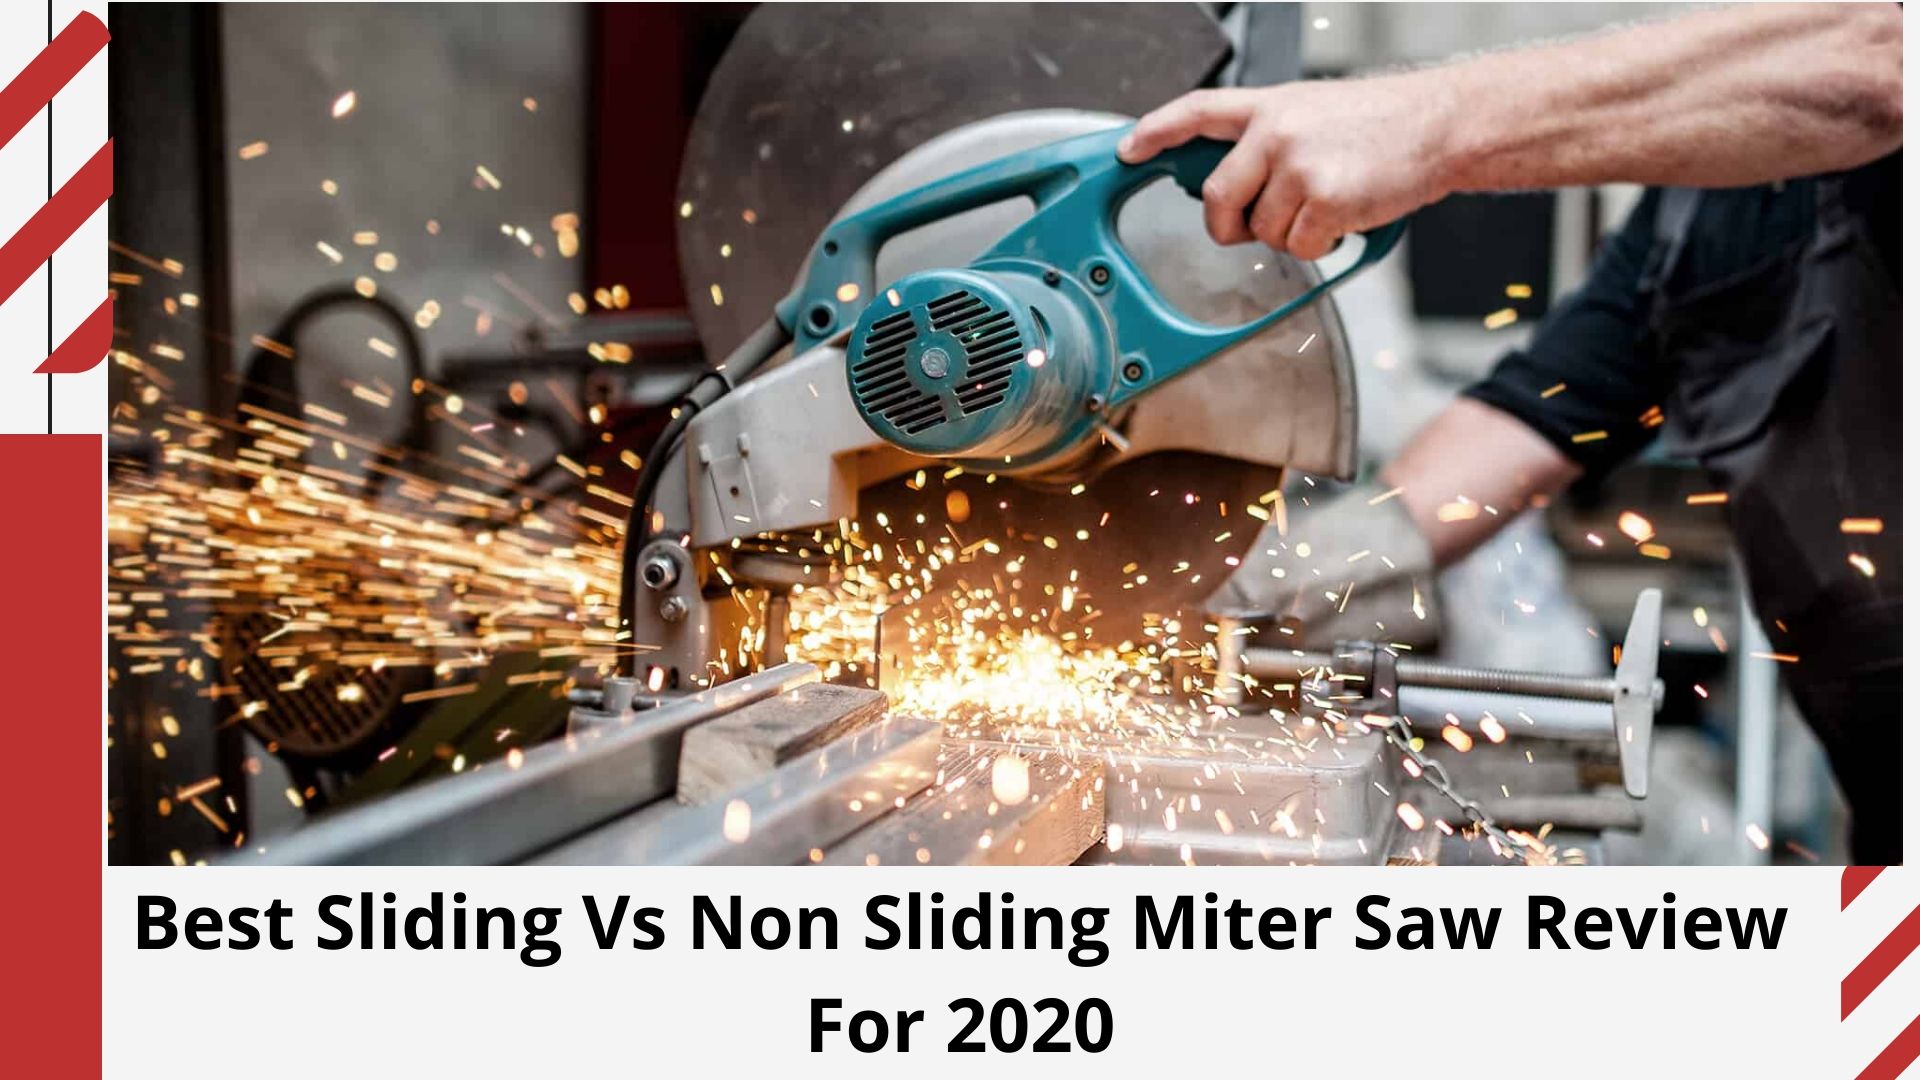 Sliding Vs Non Sliding Miter Saw Review For 2020 Best Ultimate Guide Which One You Need